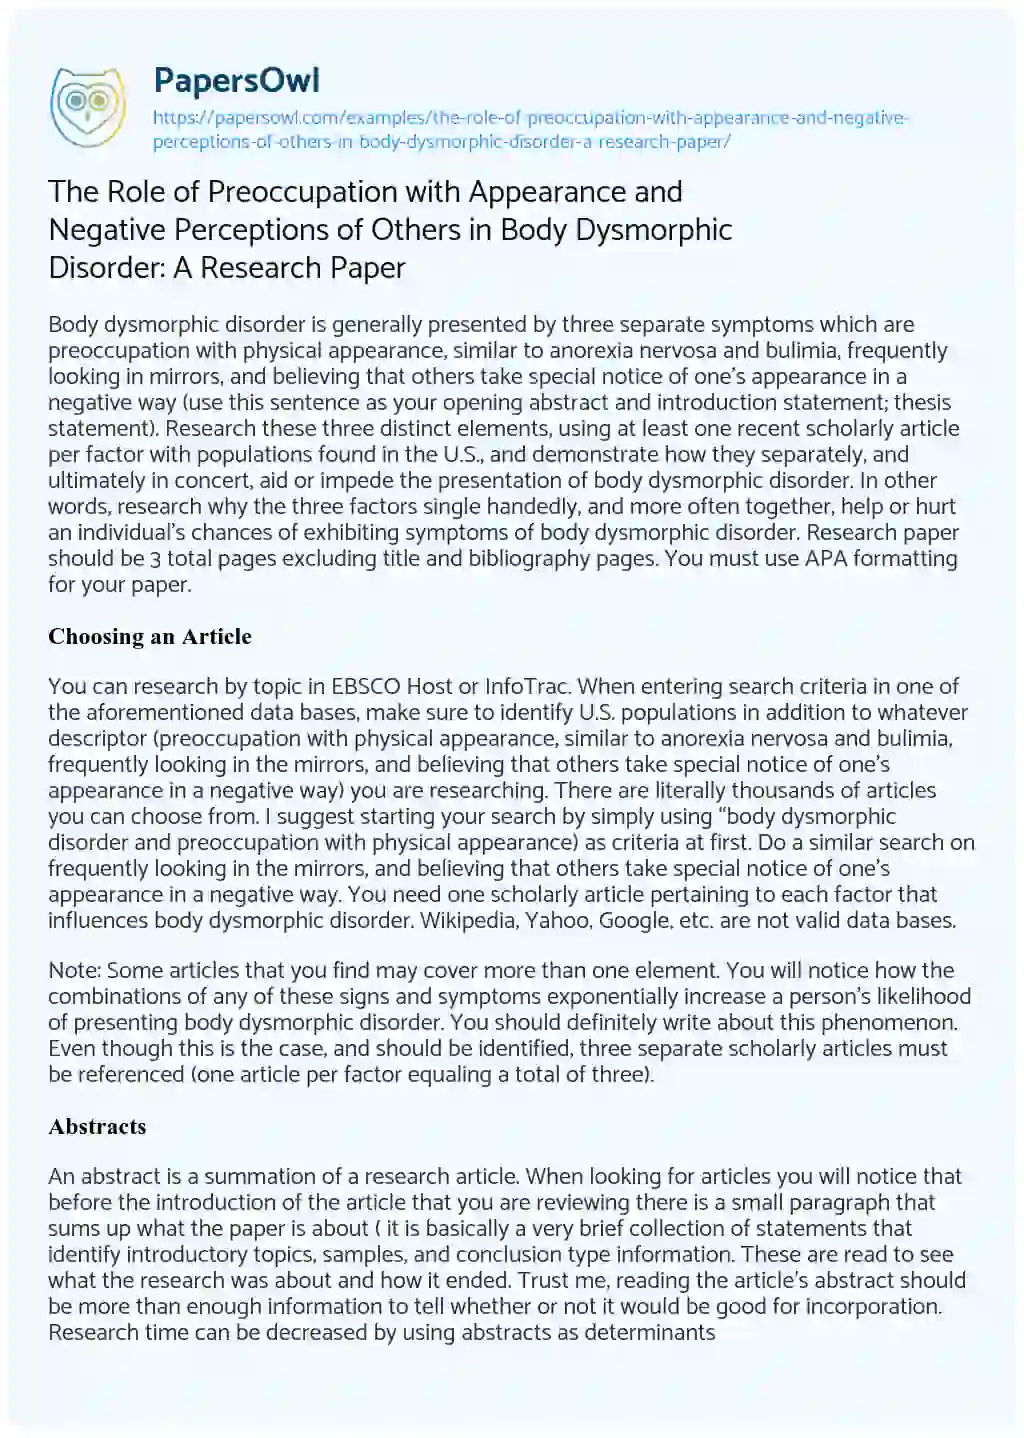 Essay on The Role of Preoccupation with Appearance and Negative Perceptions of Others in Body Dysmorphic Disorder: a Research Paper